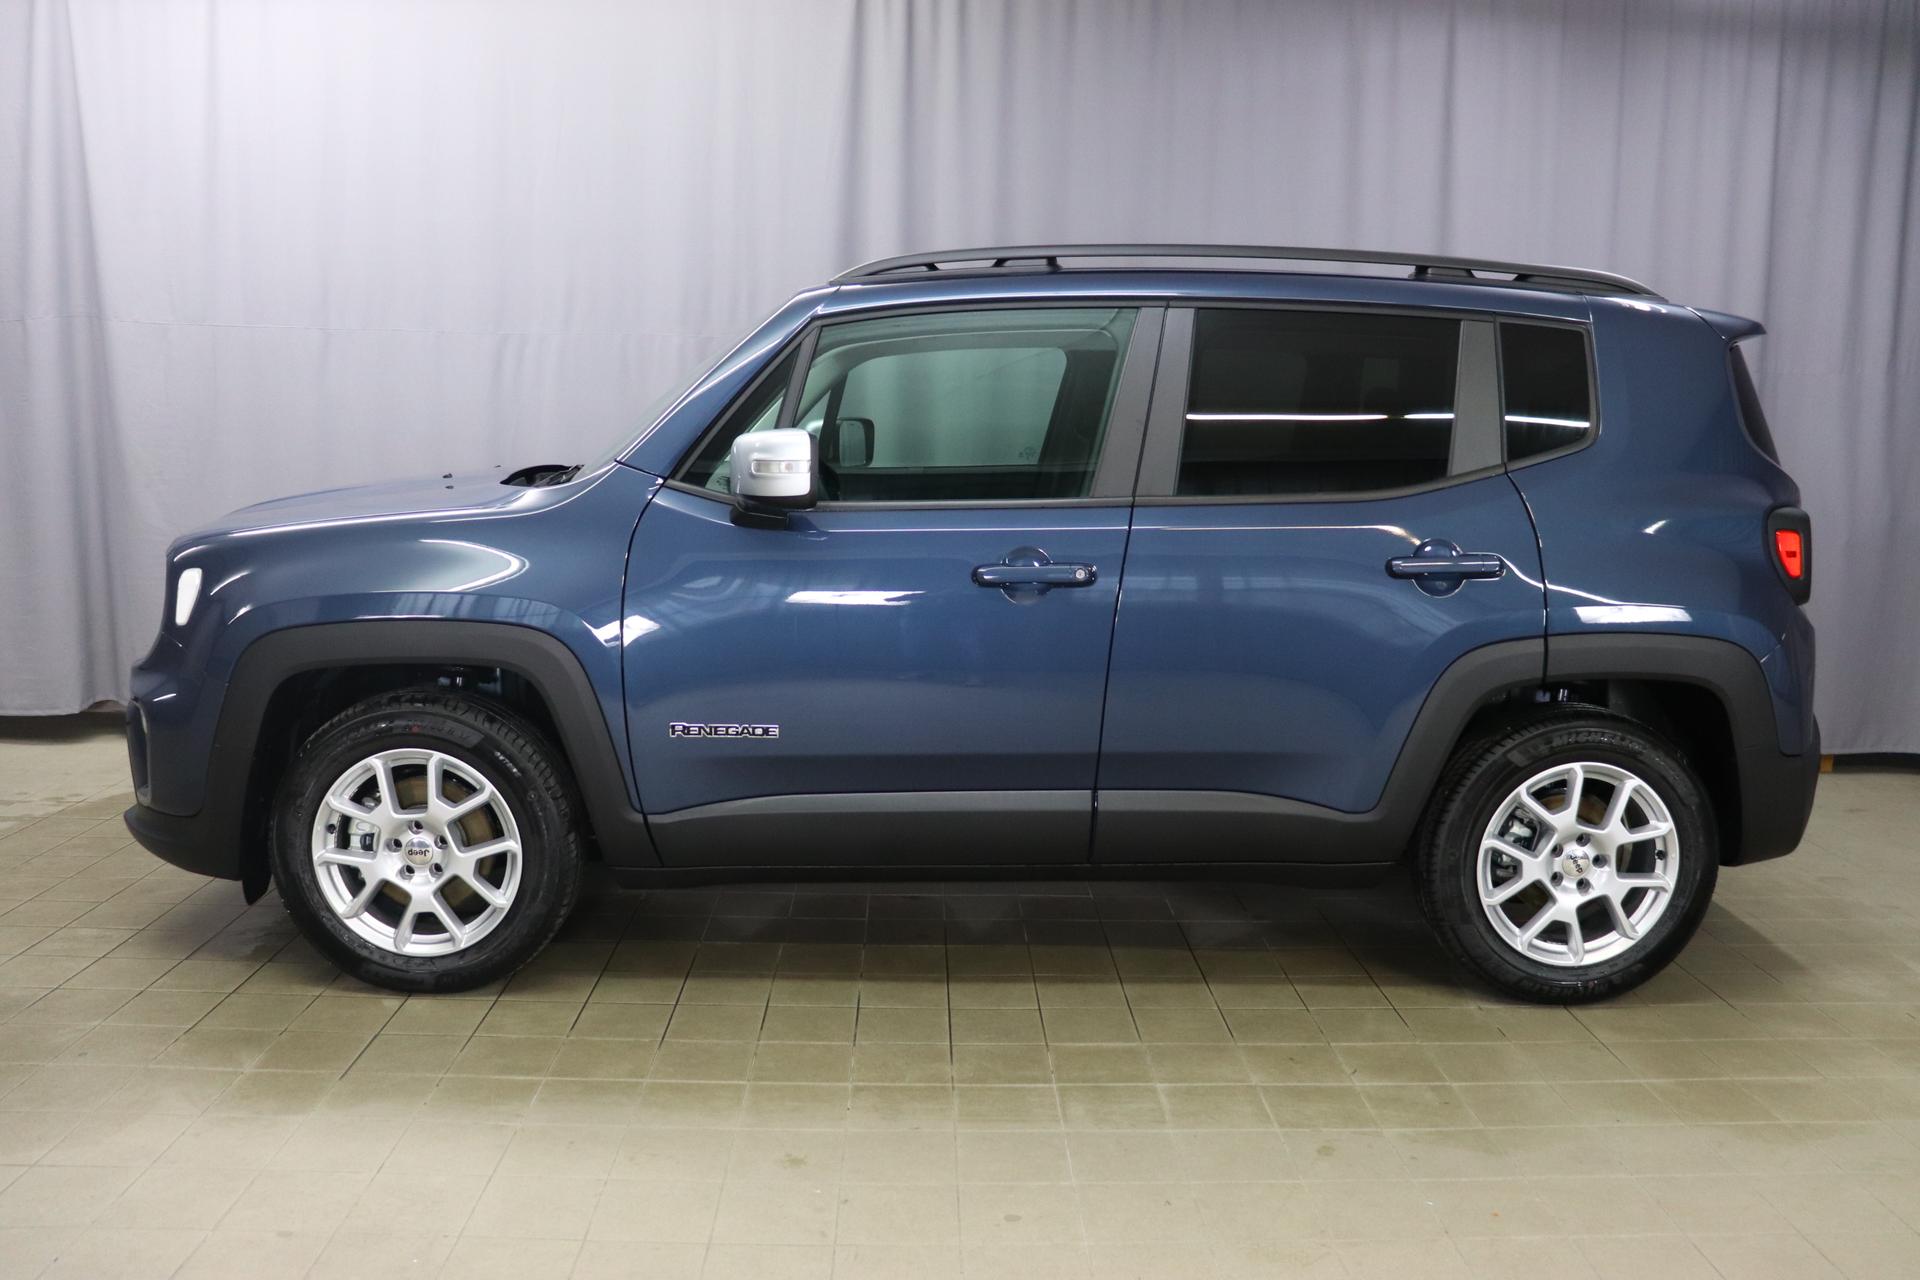 Jeep Renegade 1.5 T4 DCT7 e-Hybrid Limited   1469   96 kW435 Blue Shade	020 Stoff Schwarz